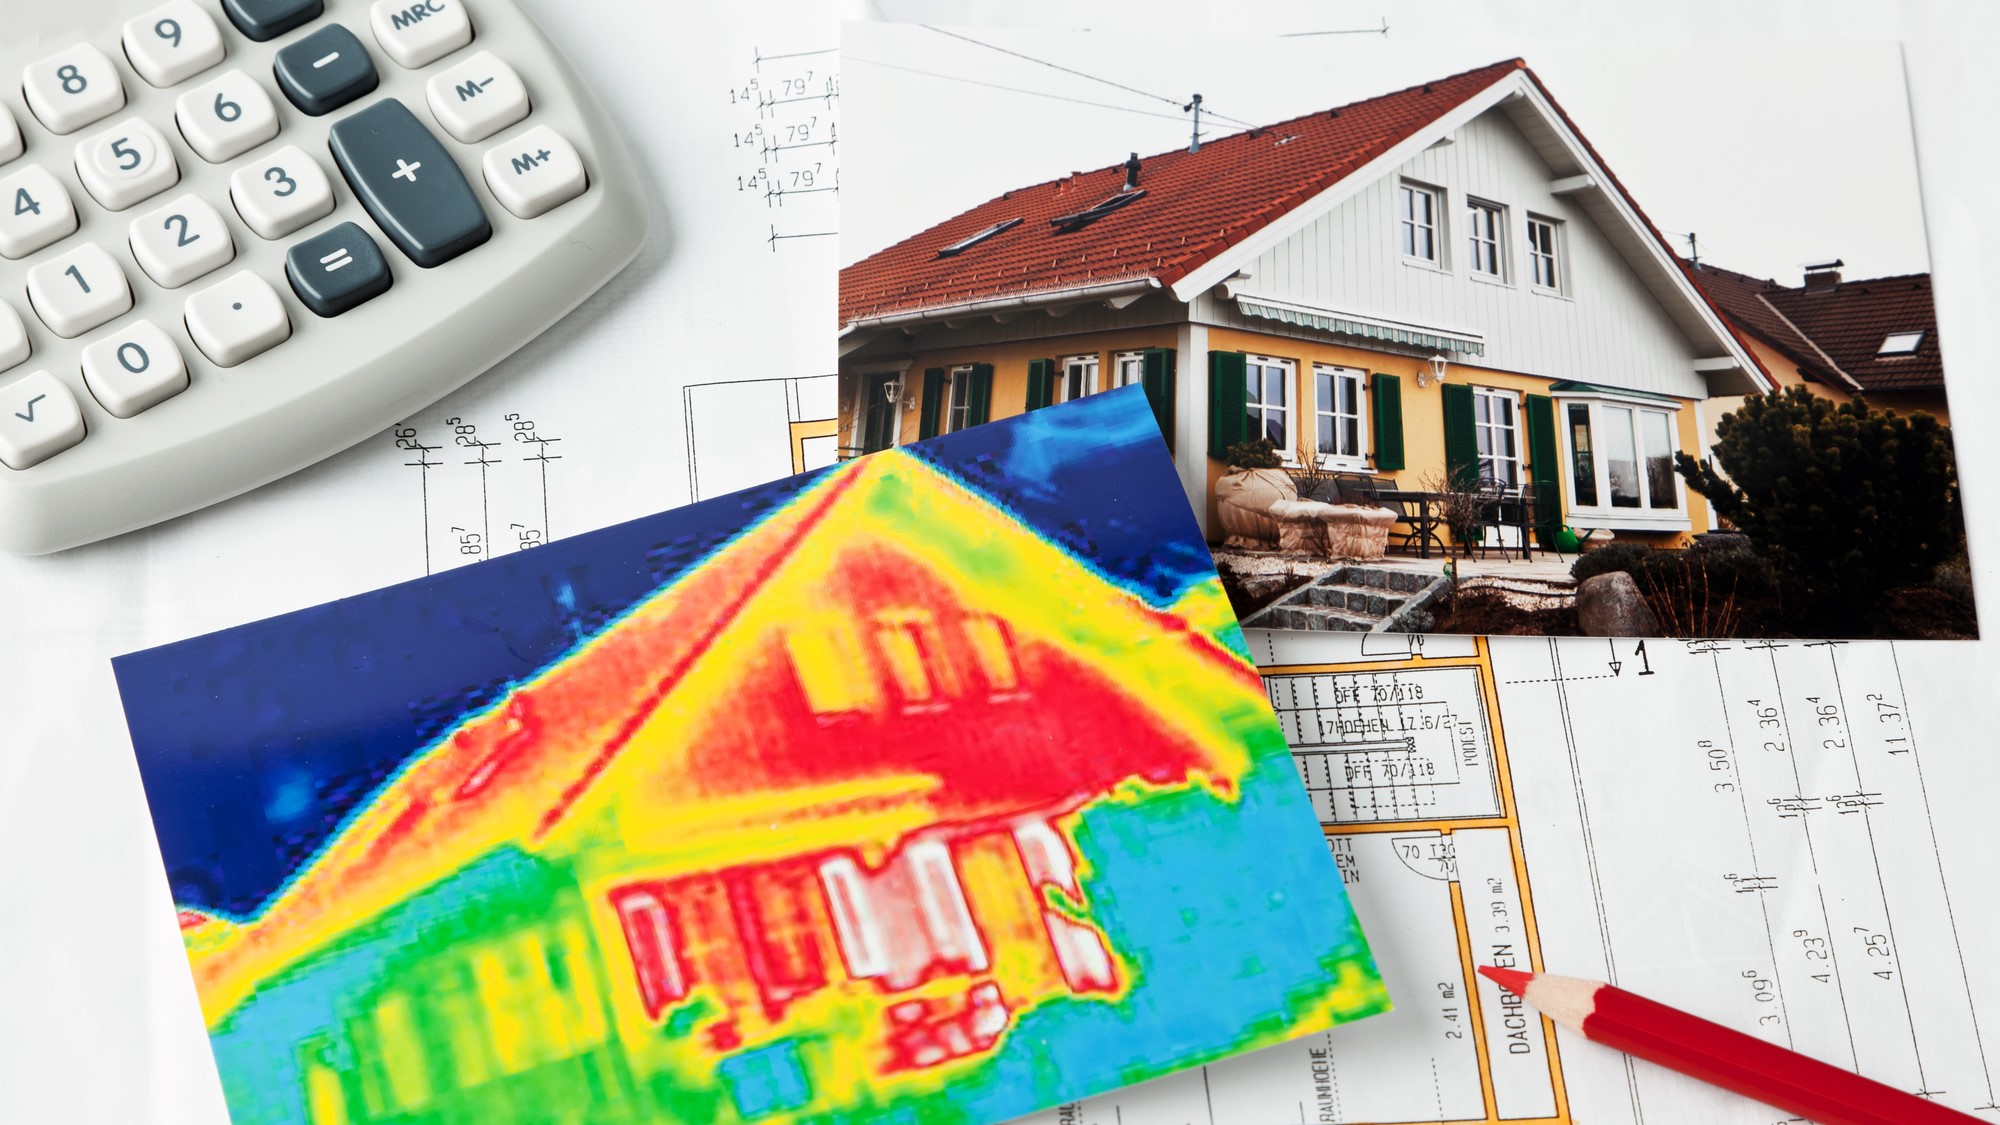 On a surface we see materials used energy audit, including infrared image of home, photo of home, drawings, calculator, pencil - photo